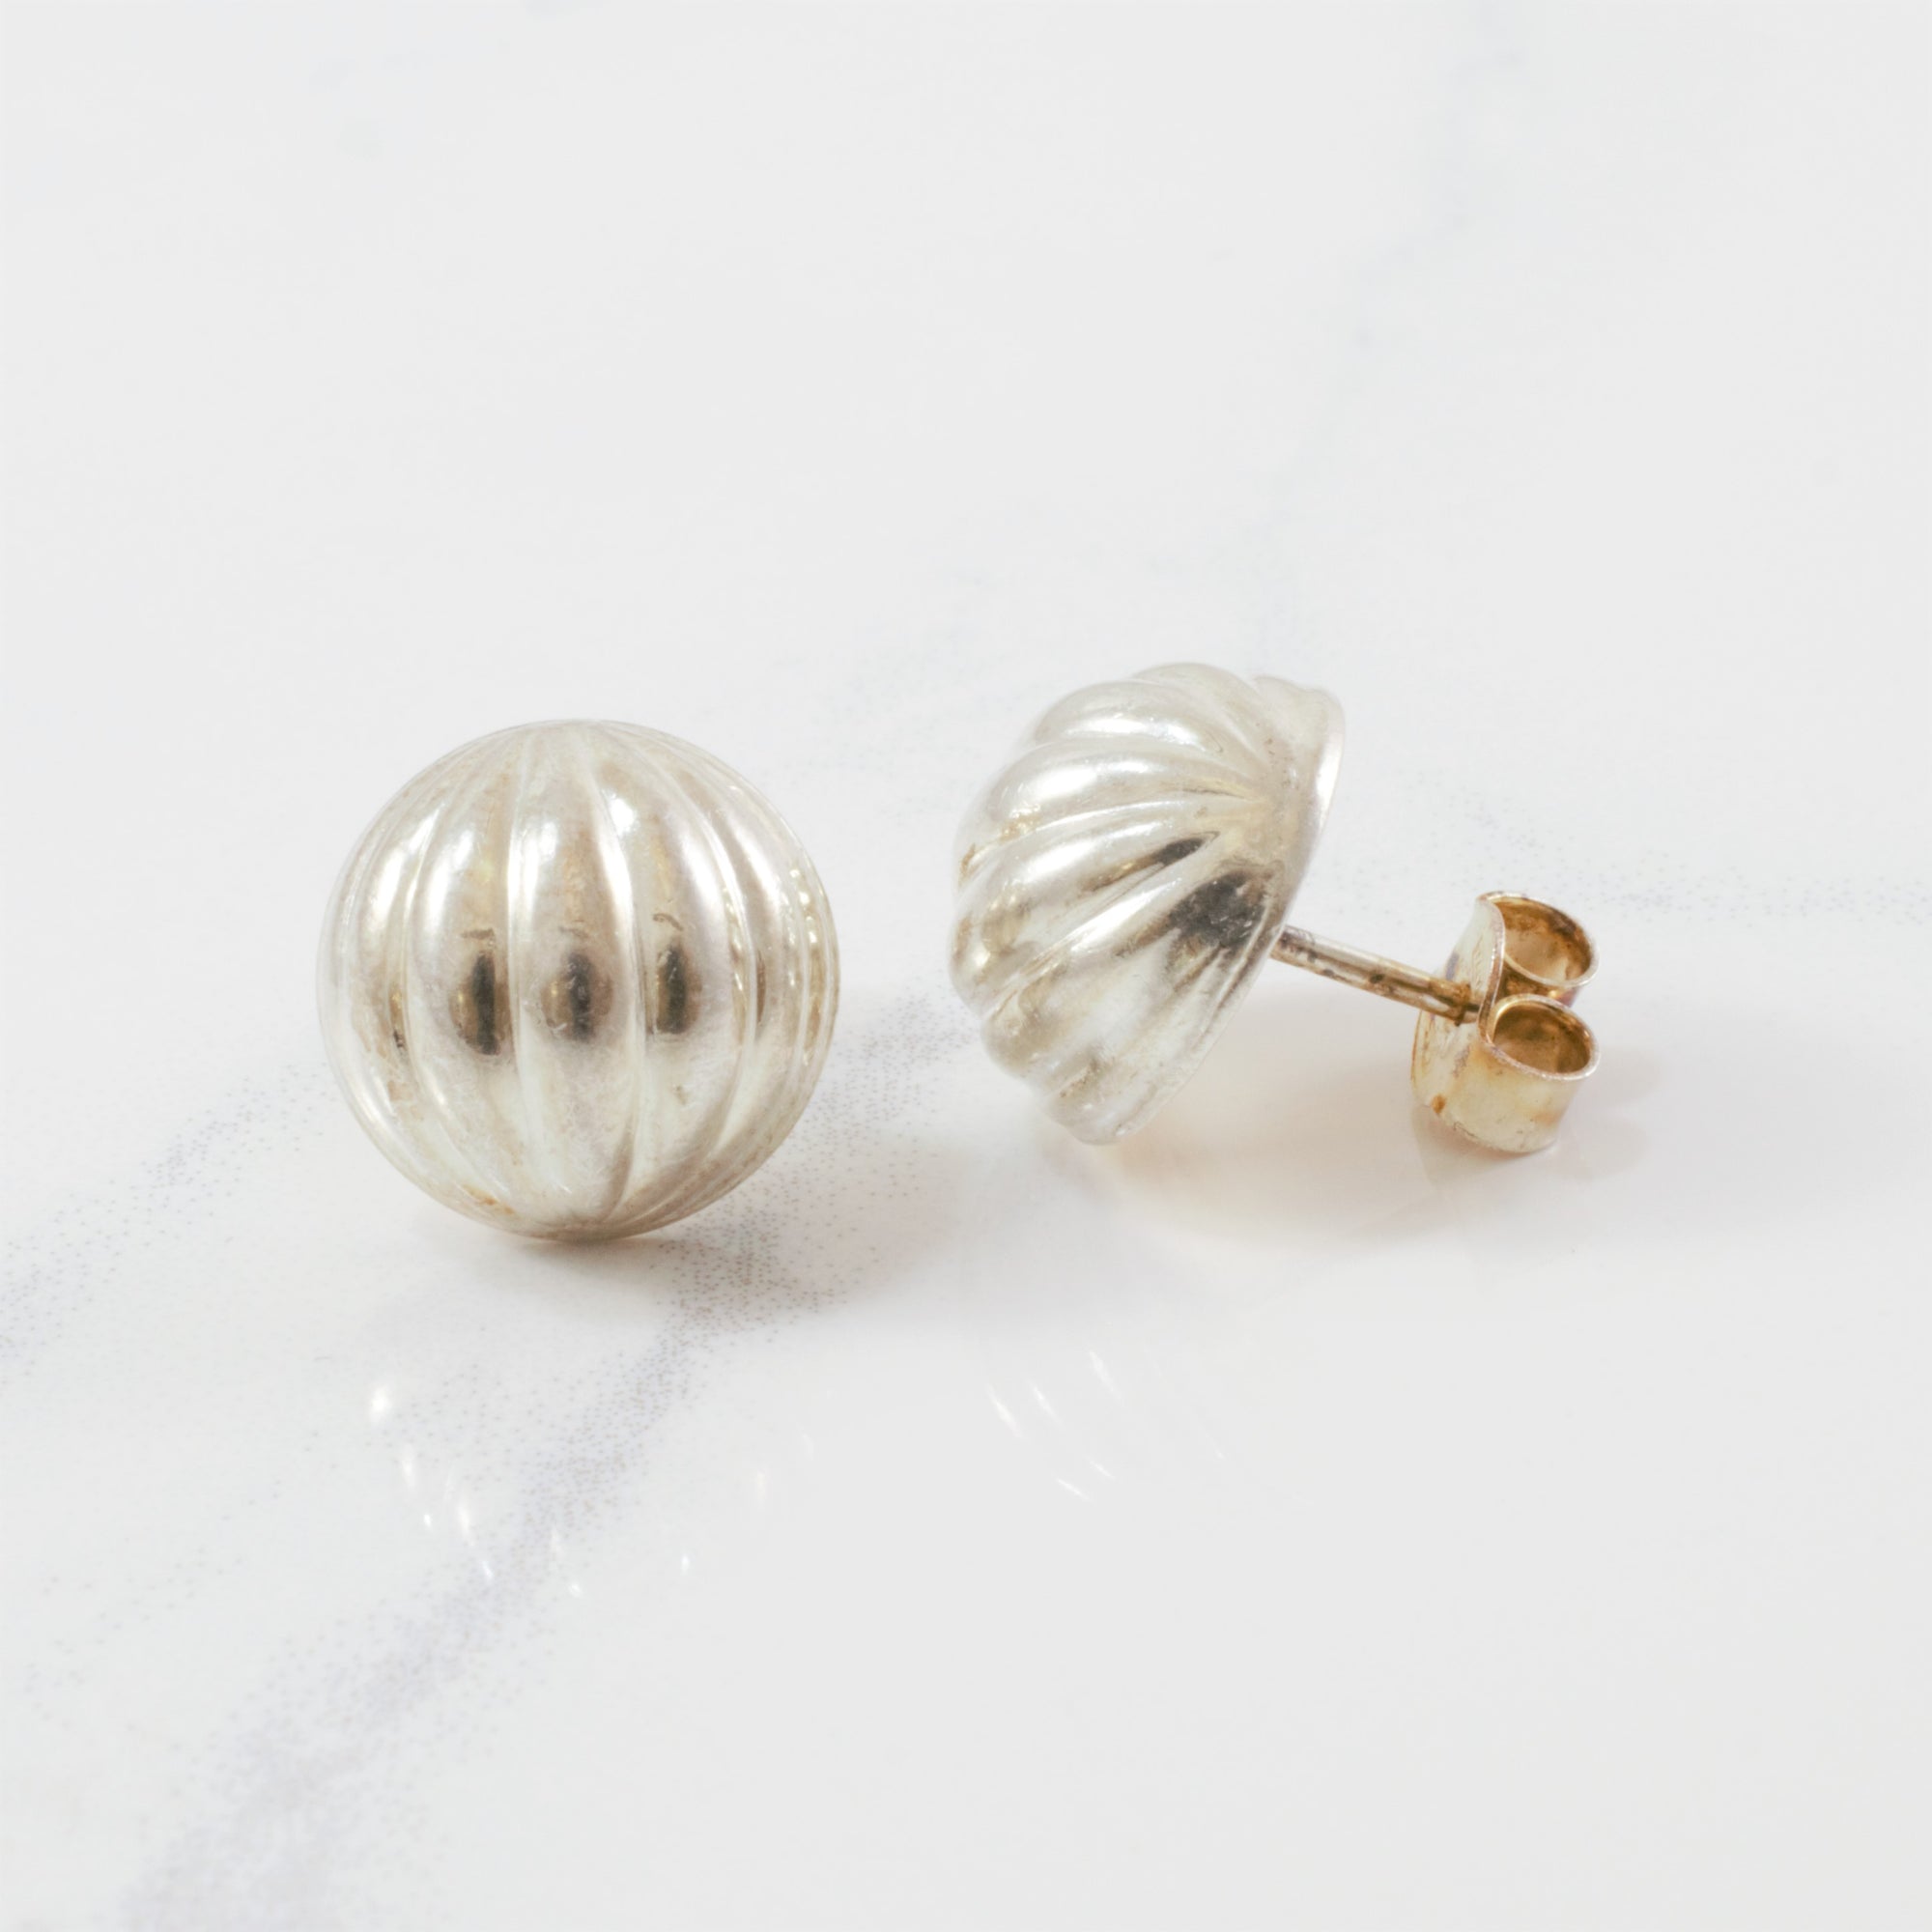 'Birks' Textured Dome Earrings